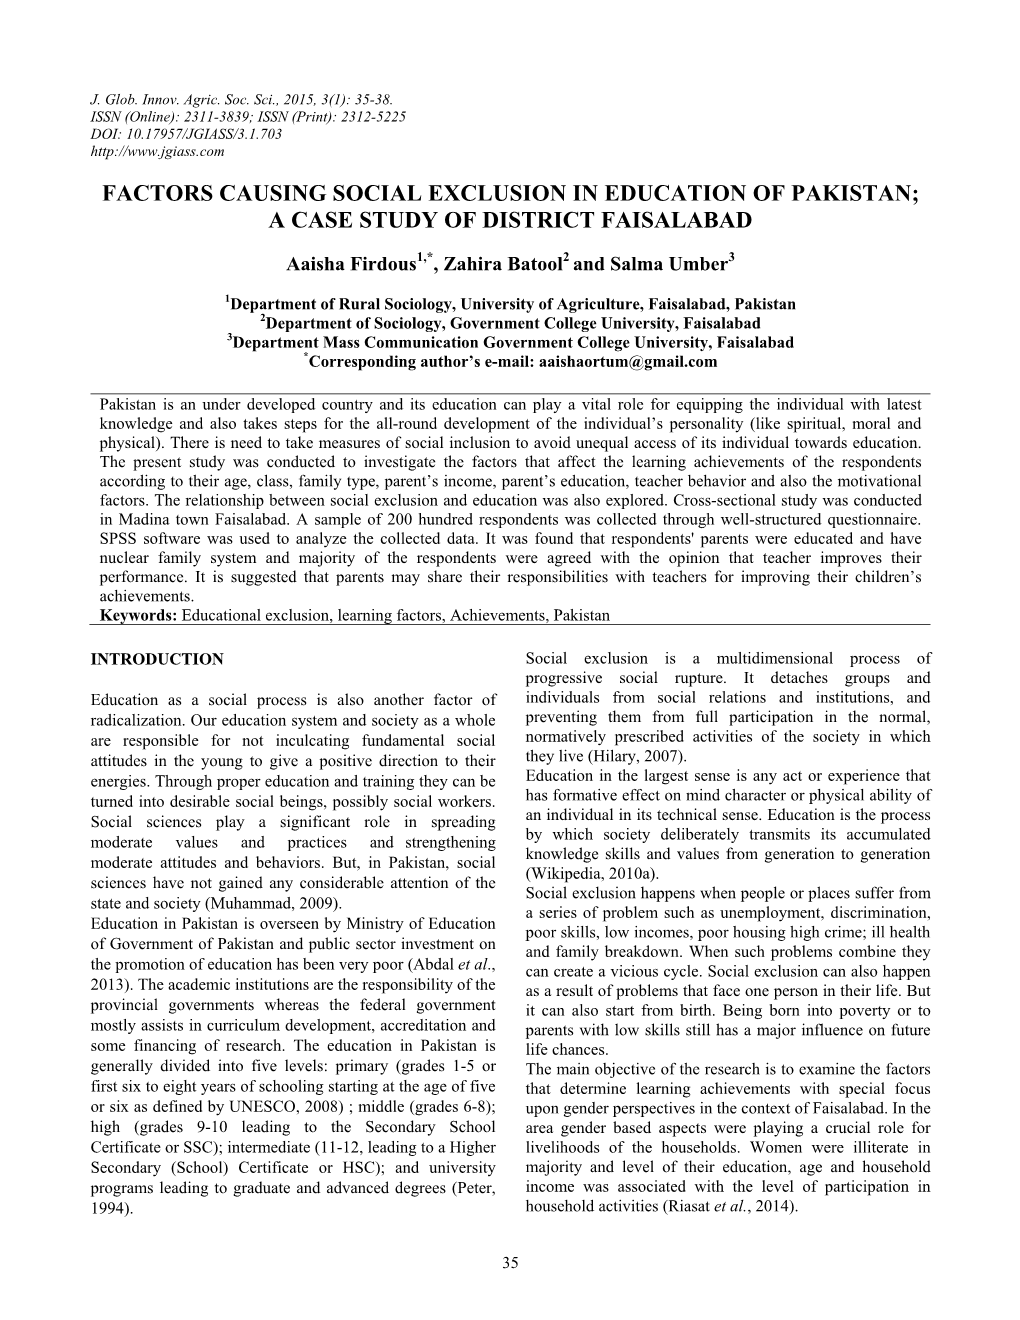 Factors Causing Social Exclusion in Education of Pakistan; a Case Study of District Faisalabad